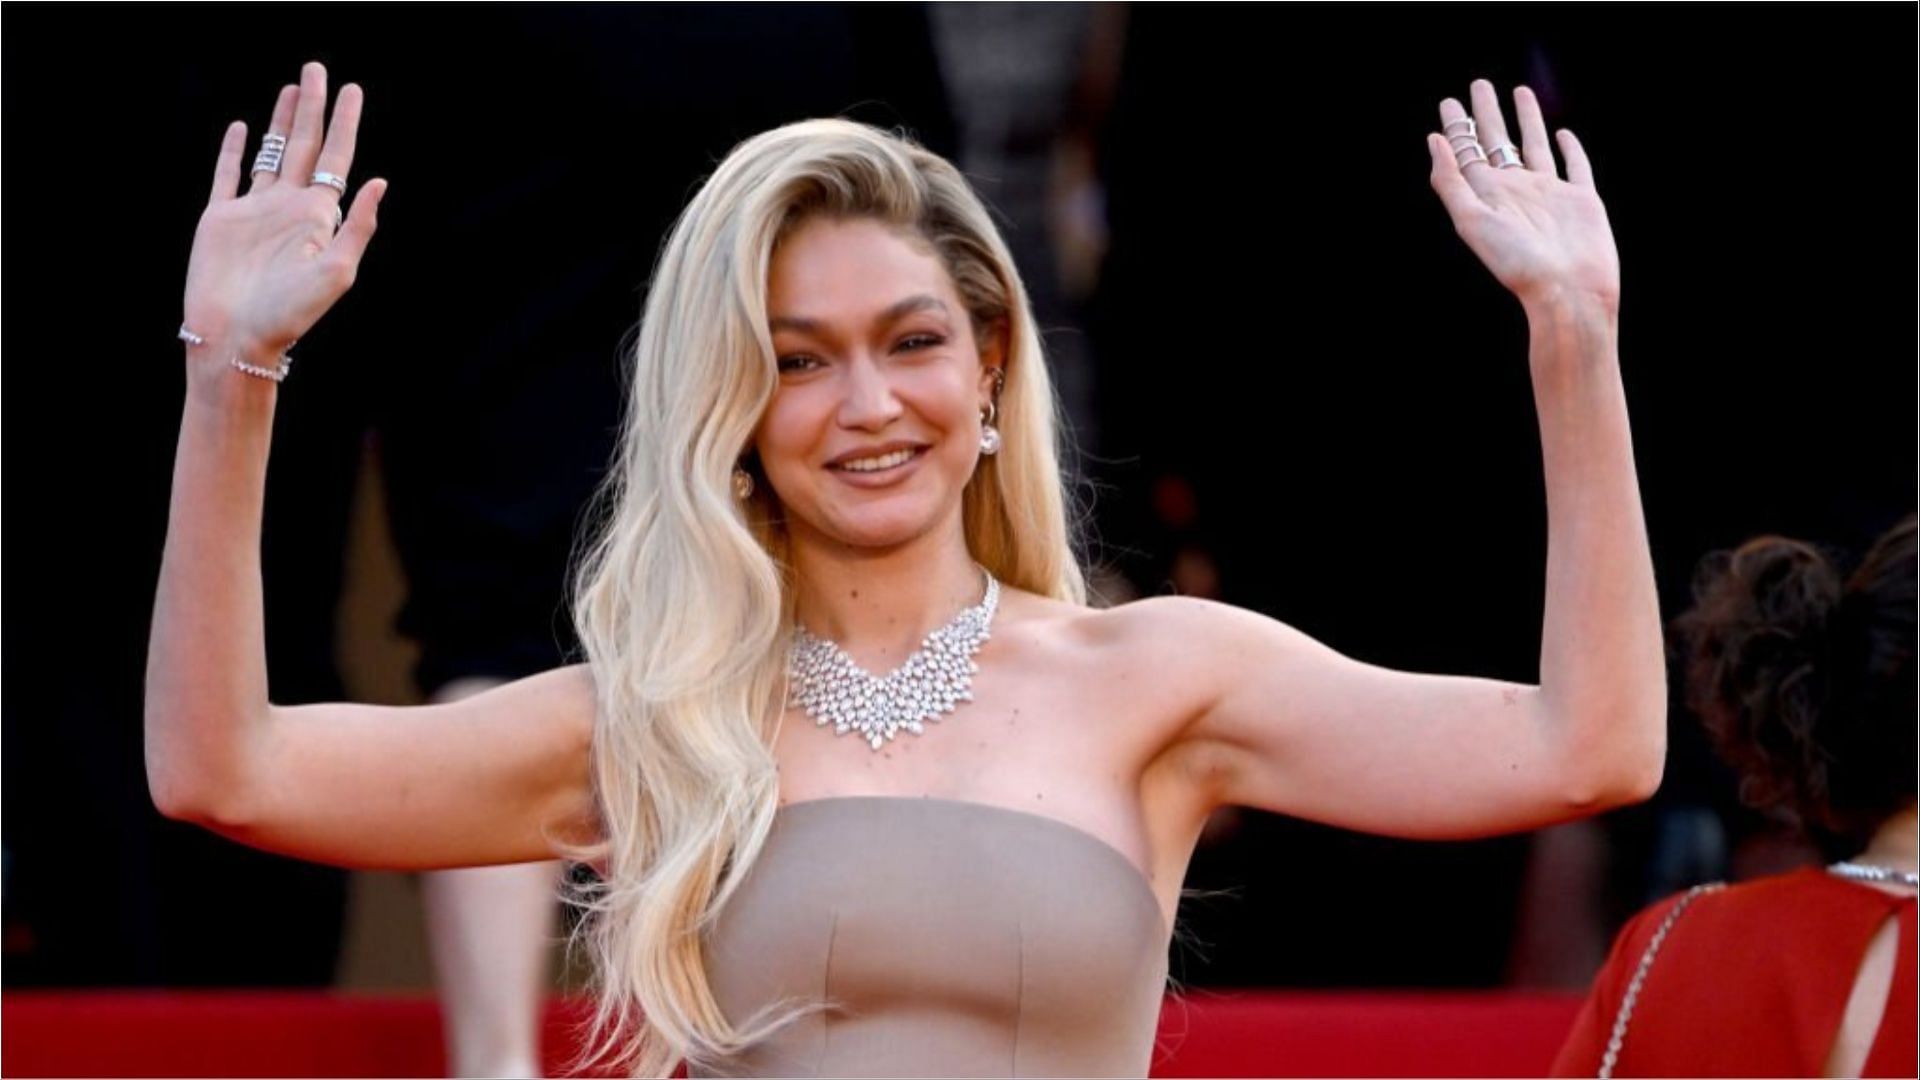 Gigi Hadid Has Suddenly and Enthusiastically Joined the Hermès